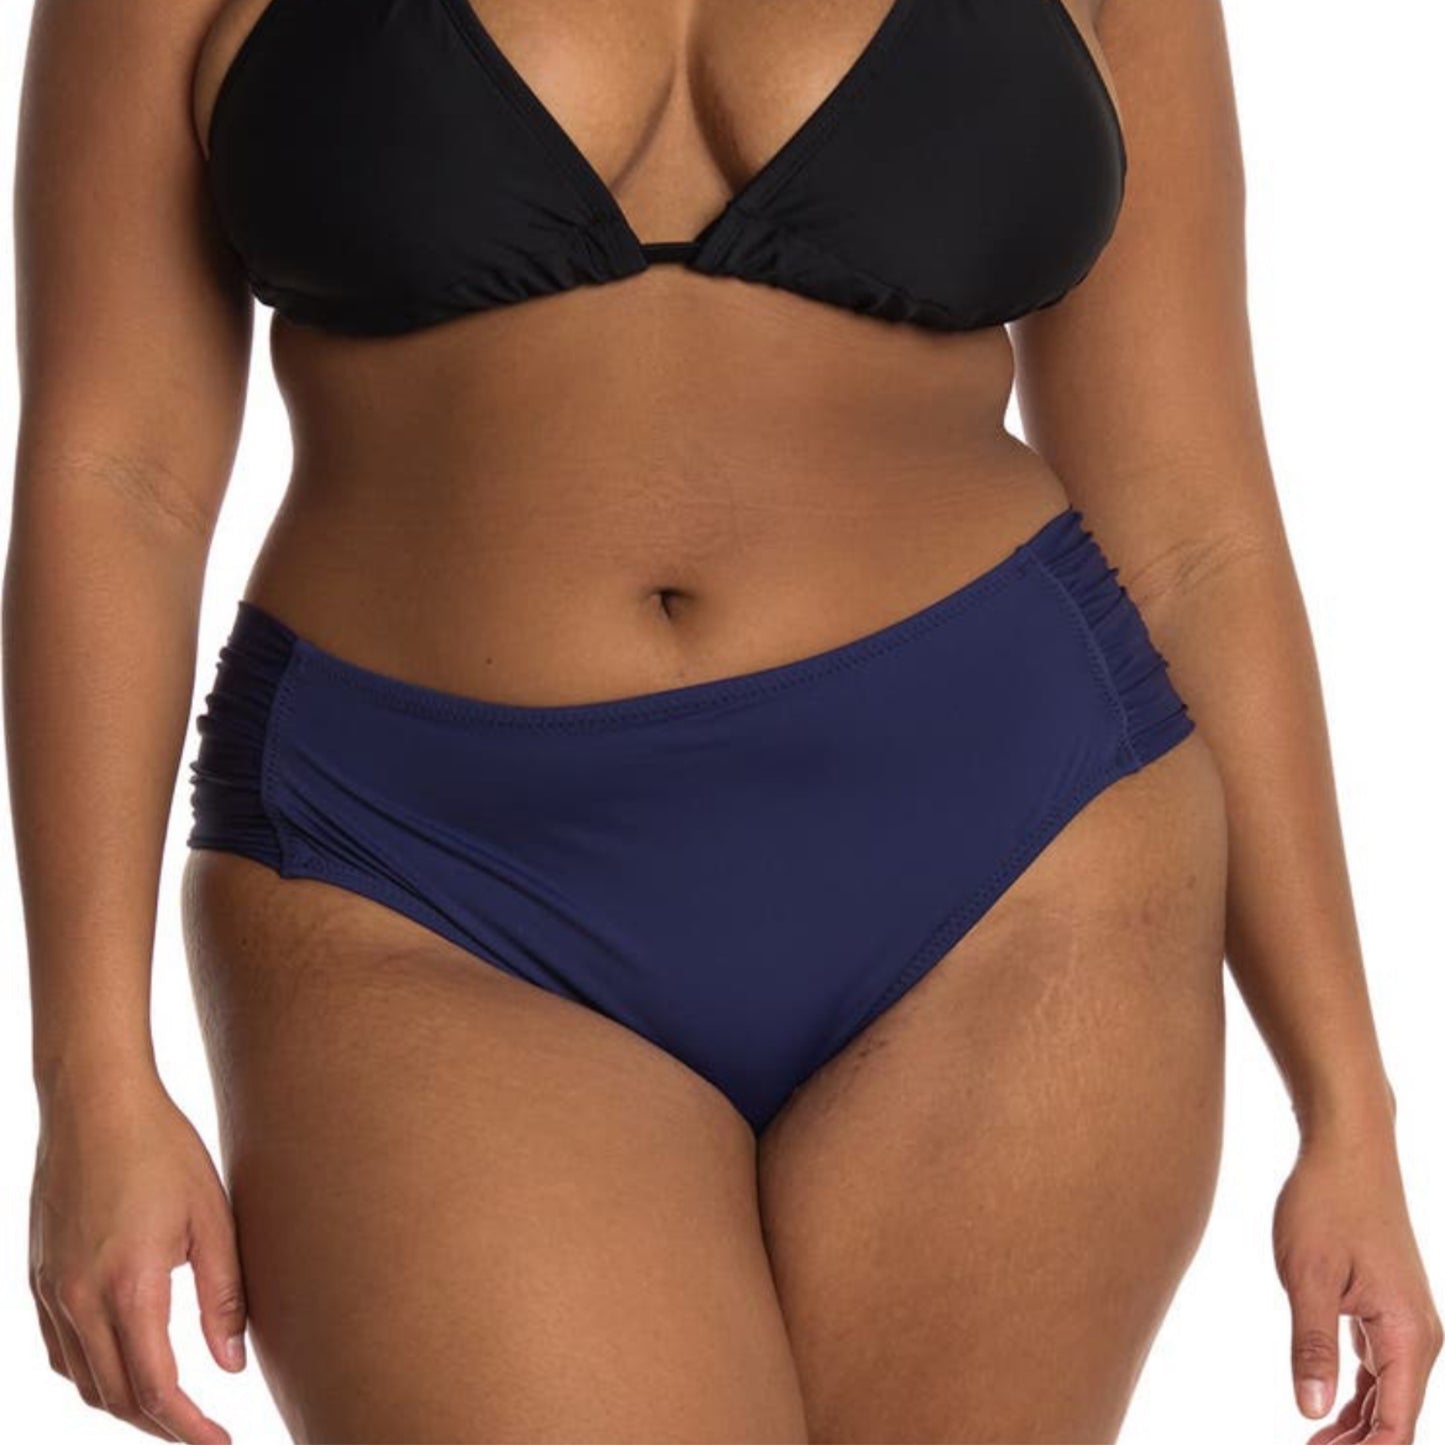 Becca Plus Size Solid Color Code Hipster Bottoms Women's Swimsuit